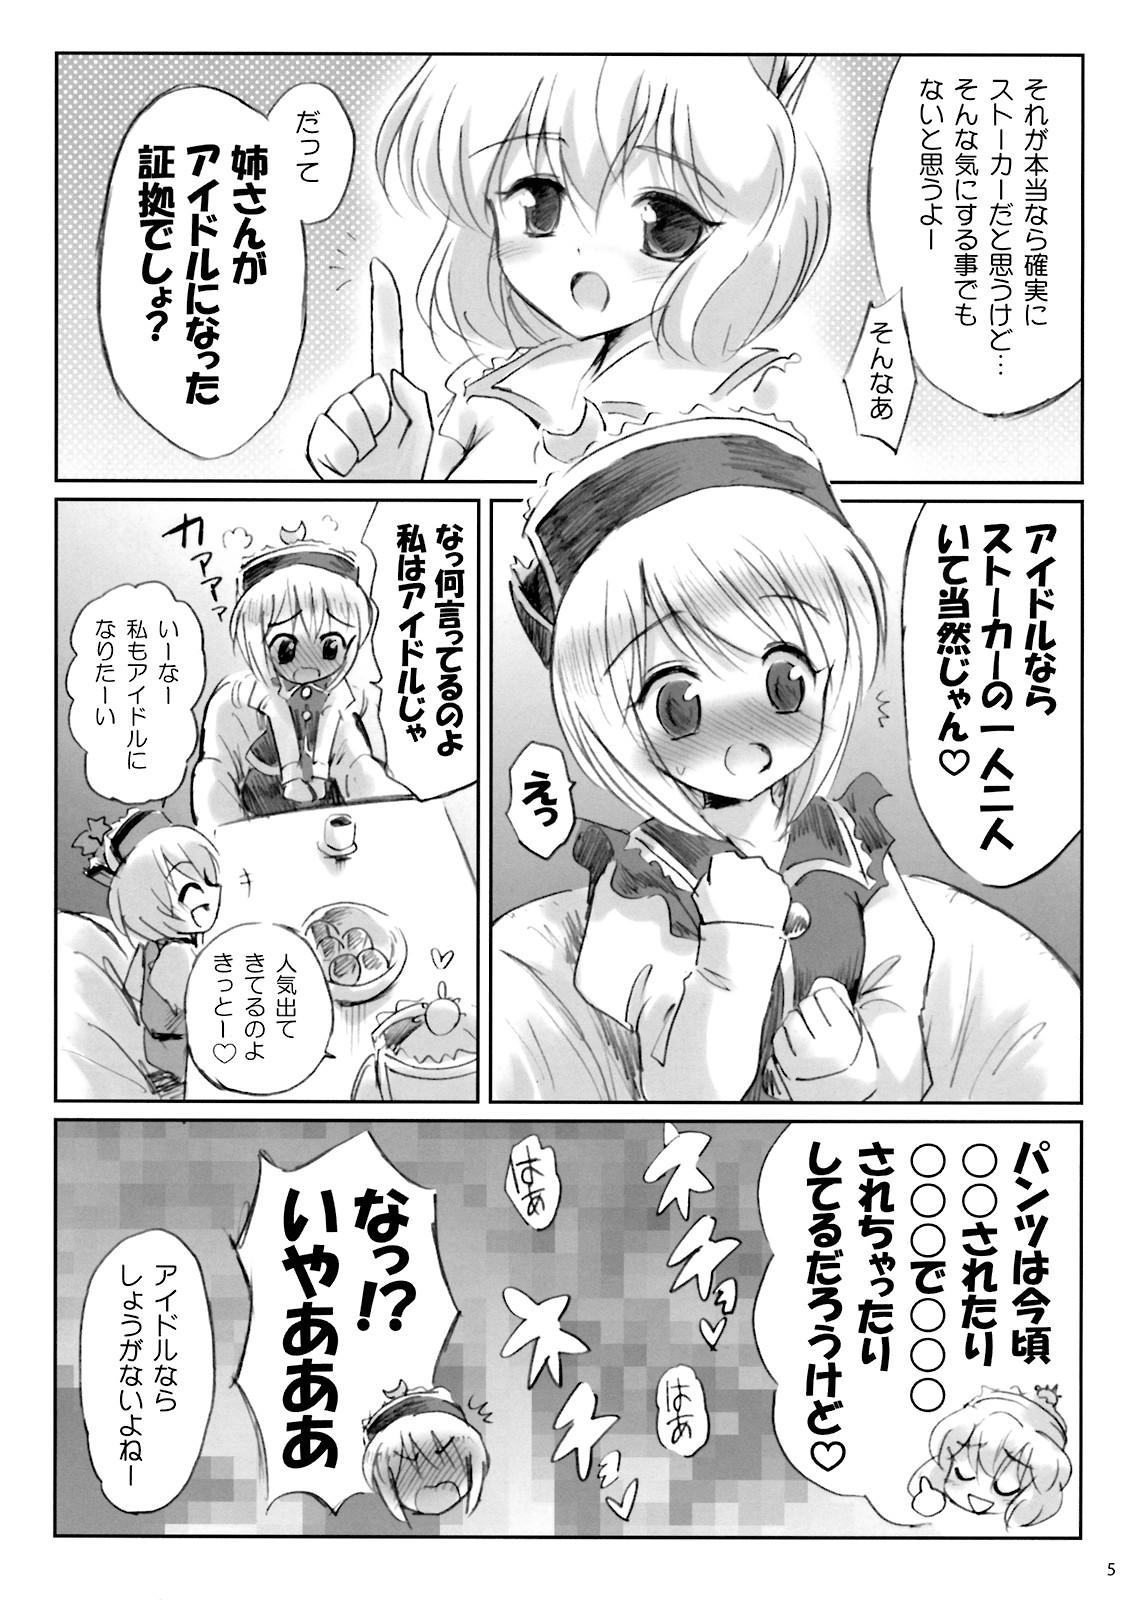 Amature Porn IDOLMASTER - Touhou project Facial - Page 4